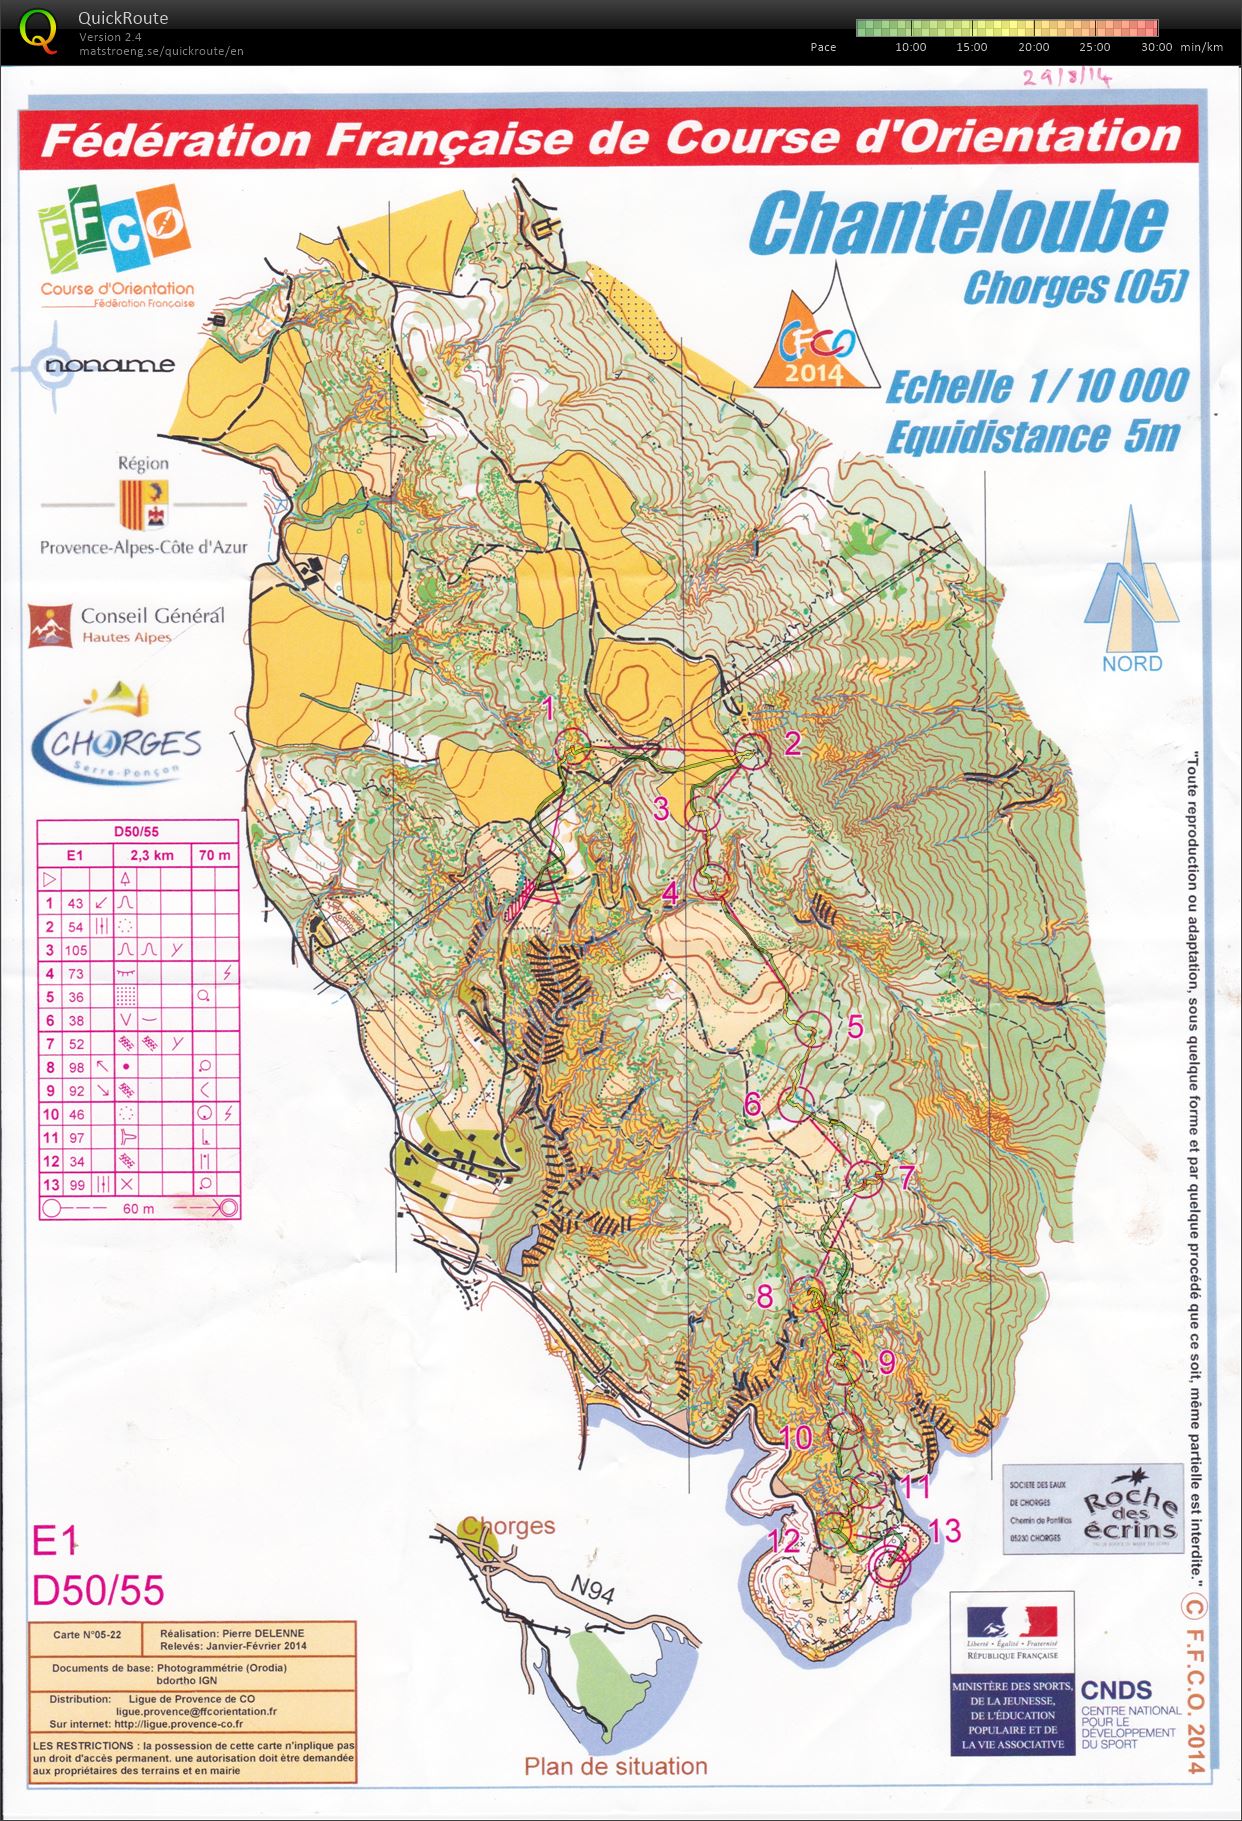 CFCO2014: Moyenne Distance (29-08-2014)